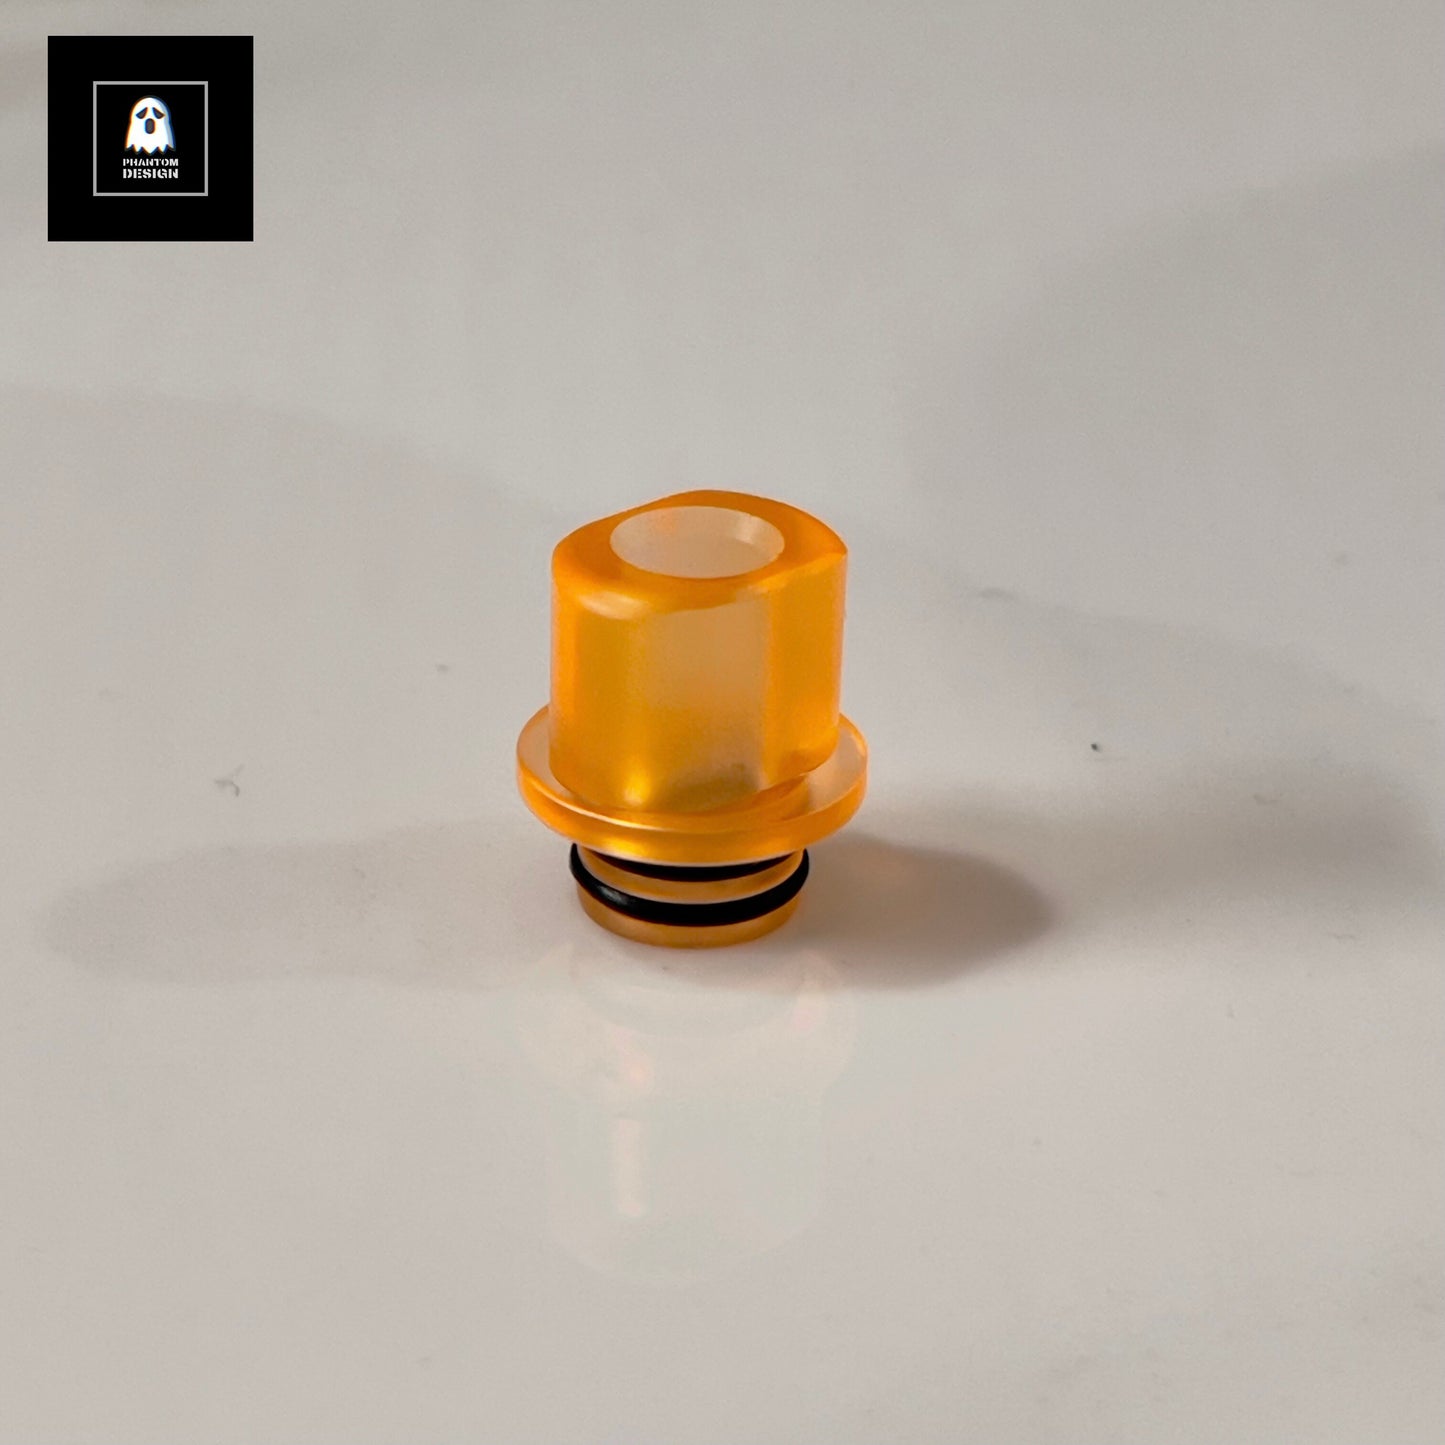 Phantom Design Premium Hand Crafted Frosted 510 Drip Tip 